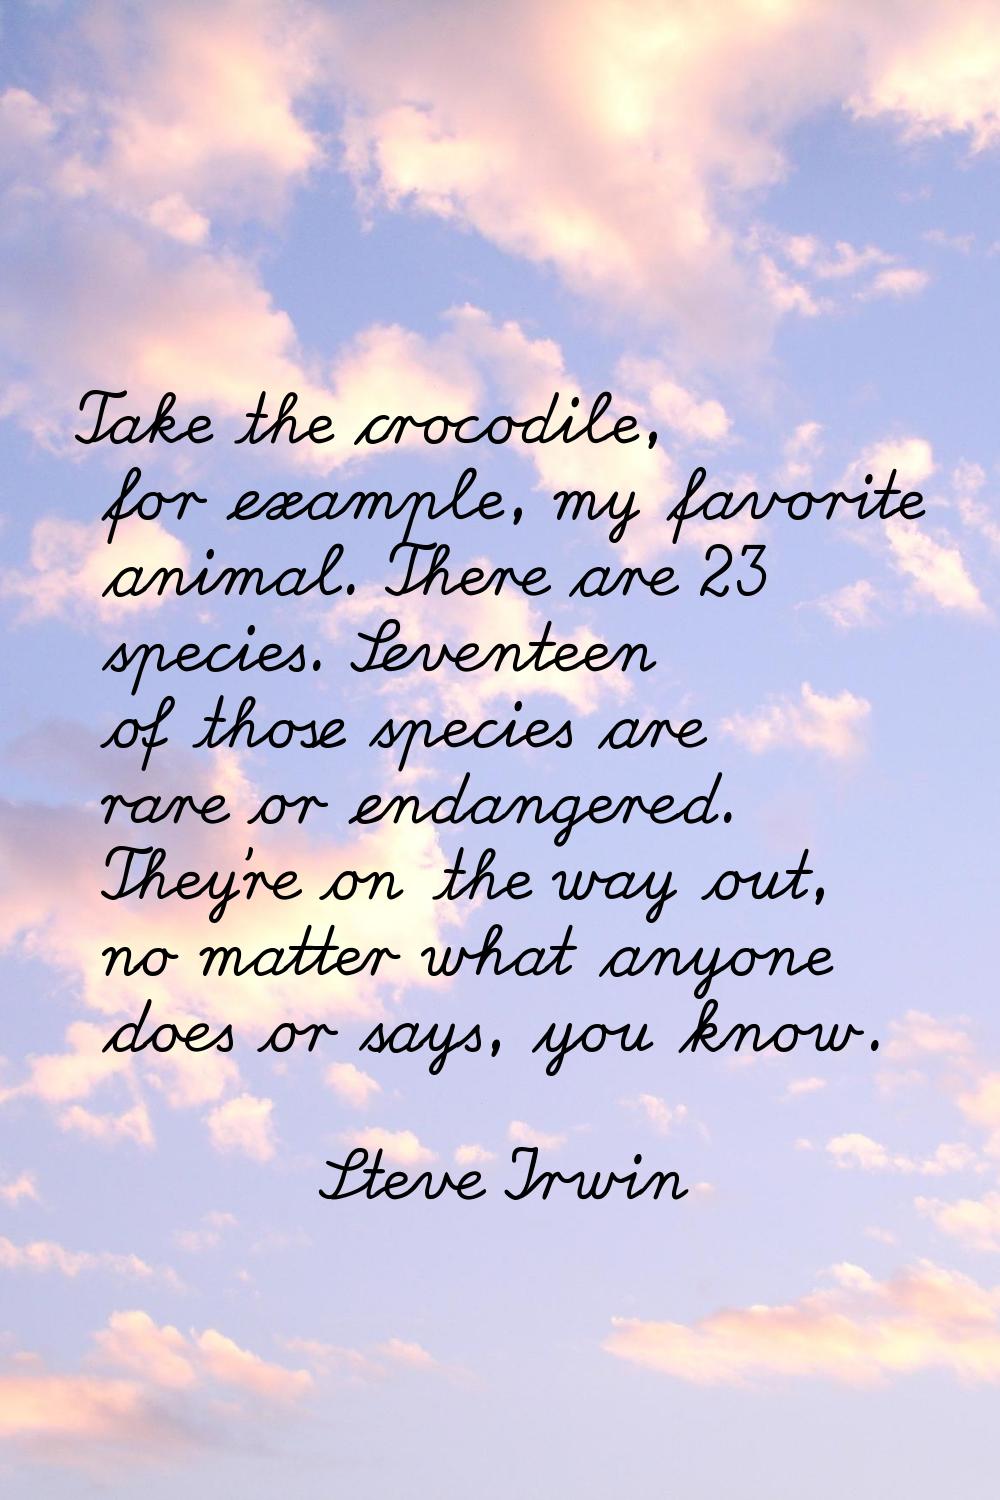 Take the crocodile, for example, my favorite animal. There are 23 species. Seventeen of those speci